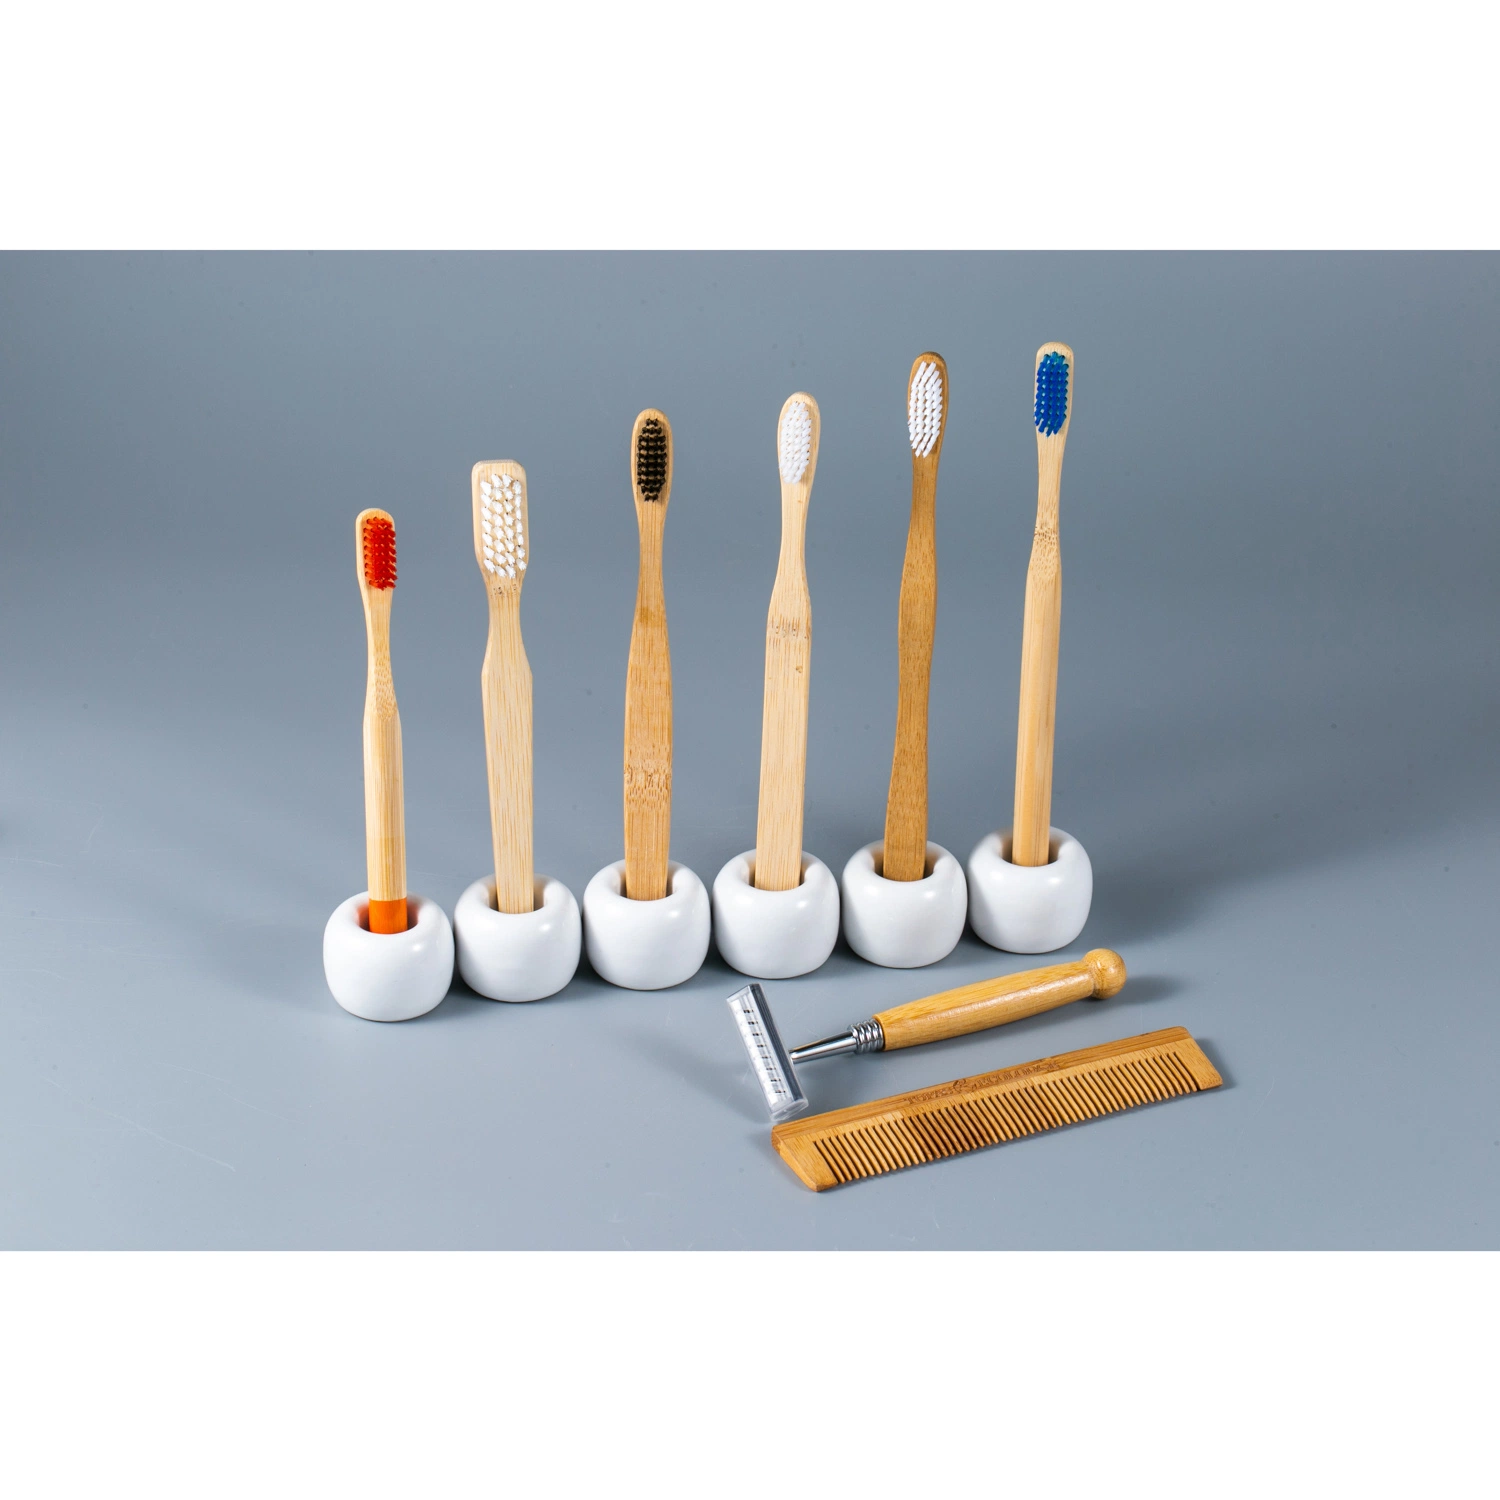 Hotel/ Household/ Travel Supplies Bamboo Toothbrush